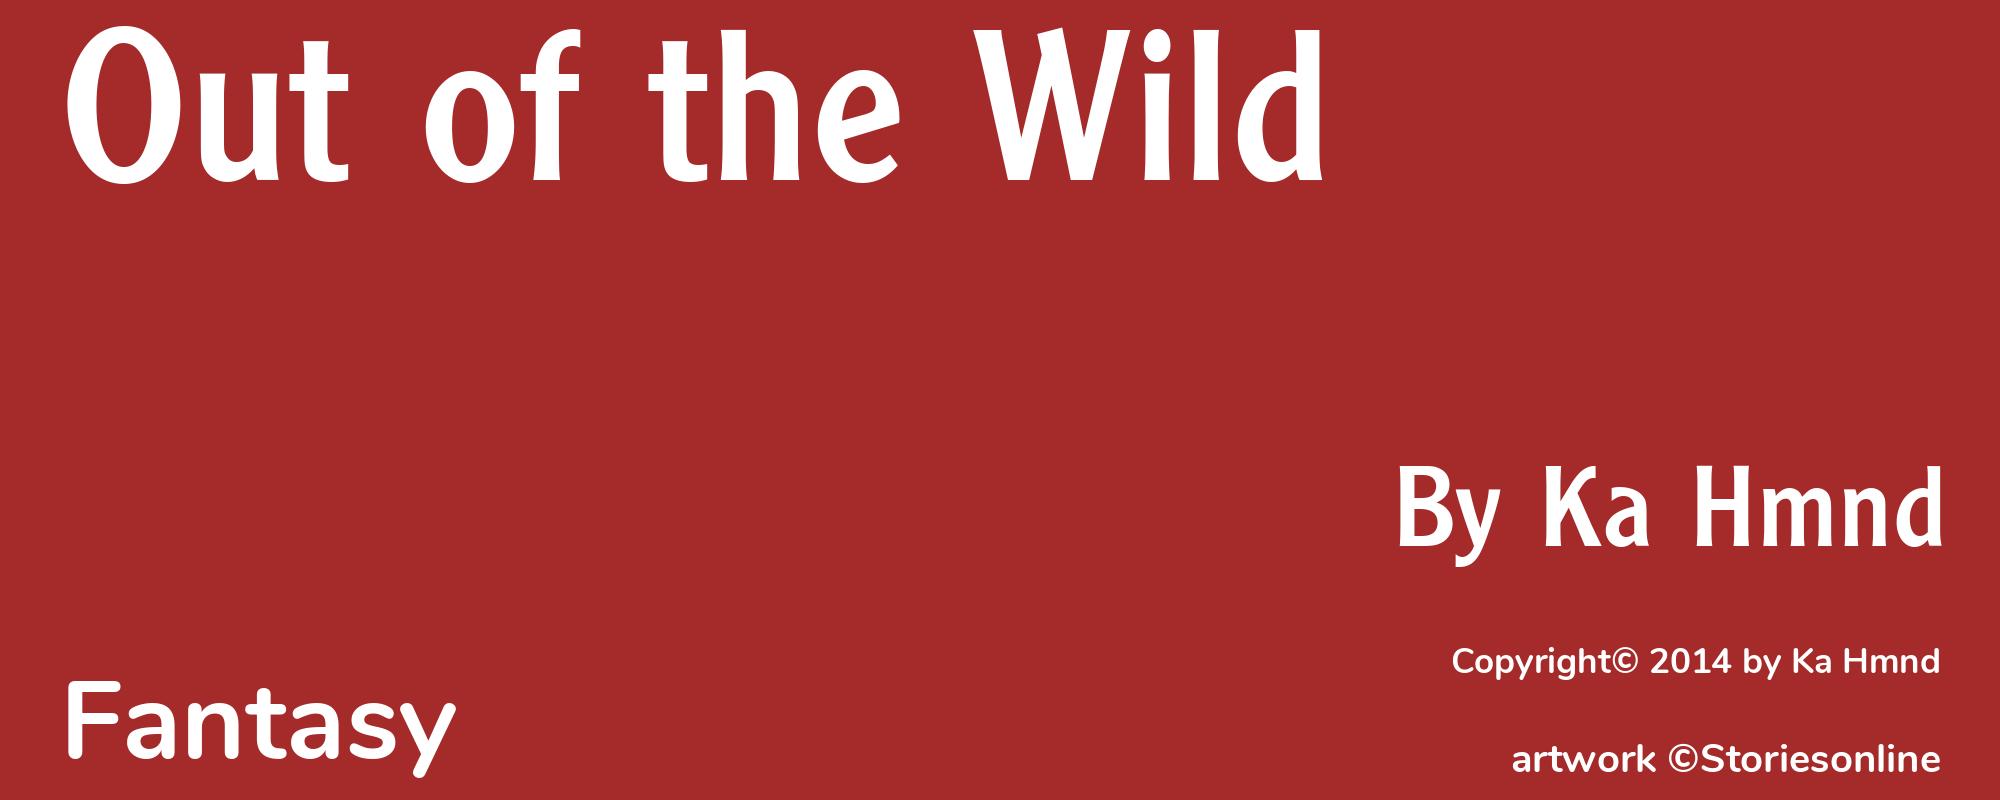 Out of the Wild - Cover